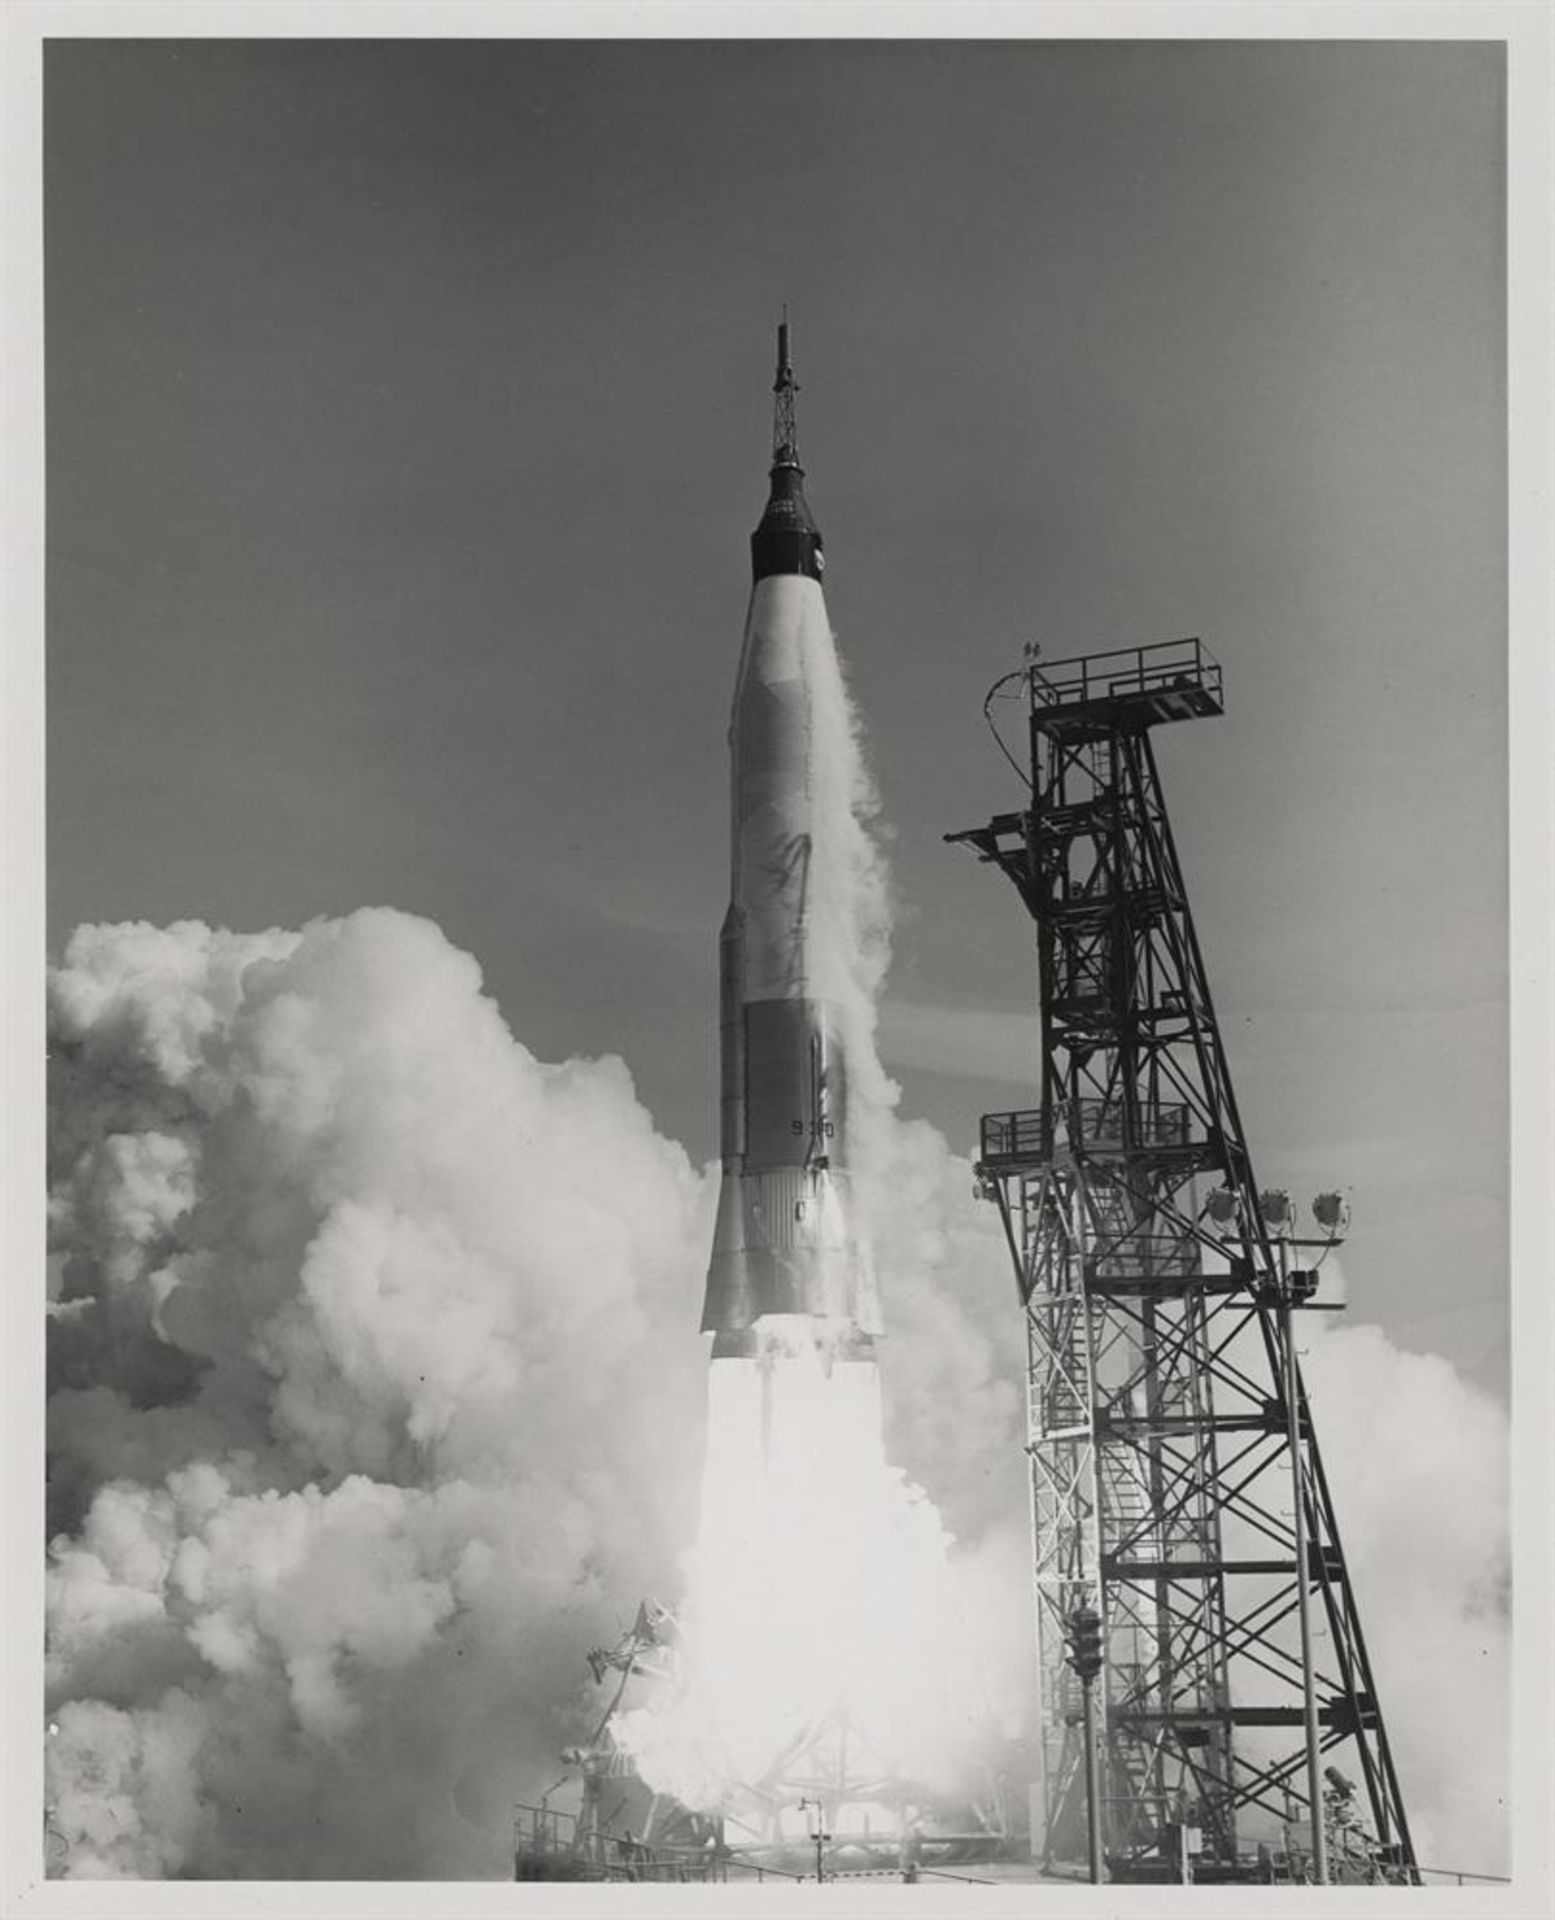 Launch of early unmanned test missions Mercury Atlas 2 and 5, 21 February and 29 November 1961 - Image 4 of 5